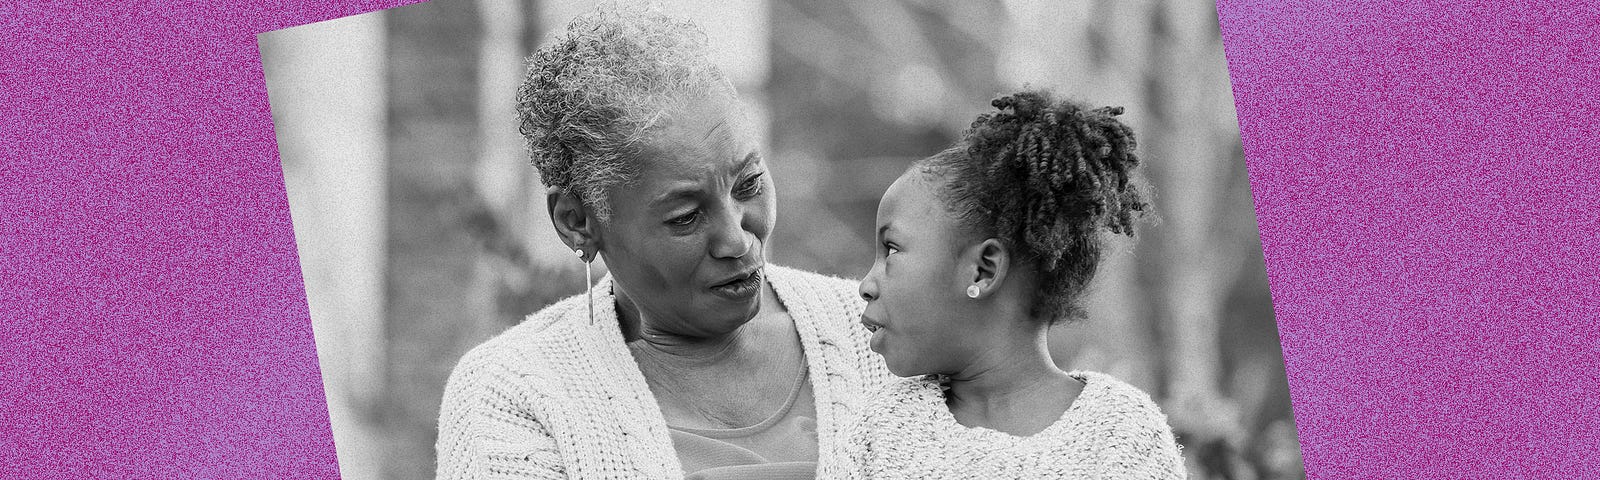 Black and white photo of a Black grandma and granddaughter against a violet background.